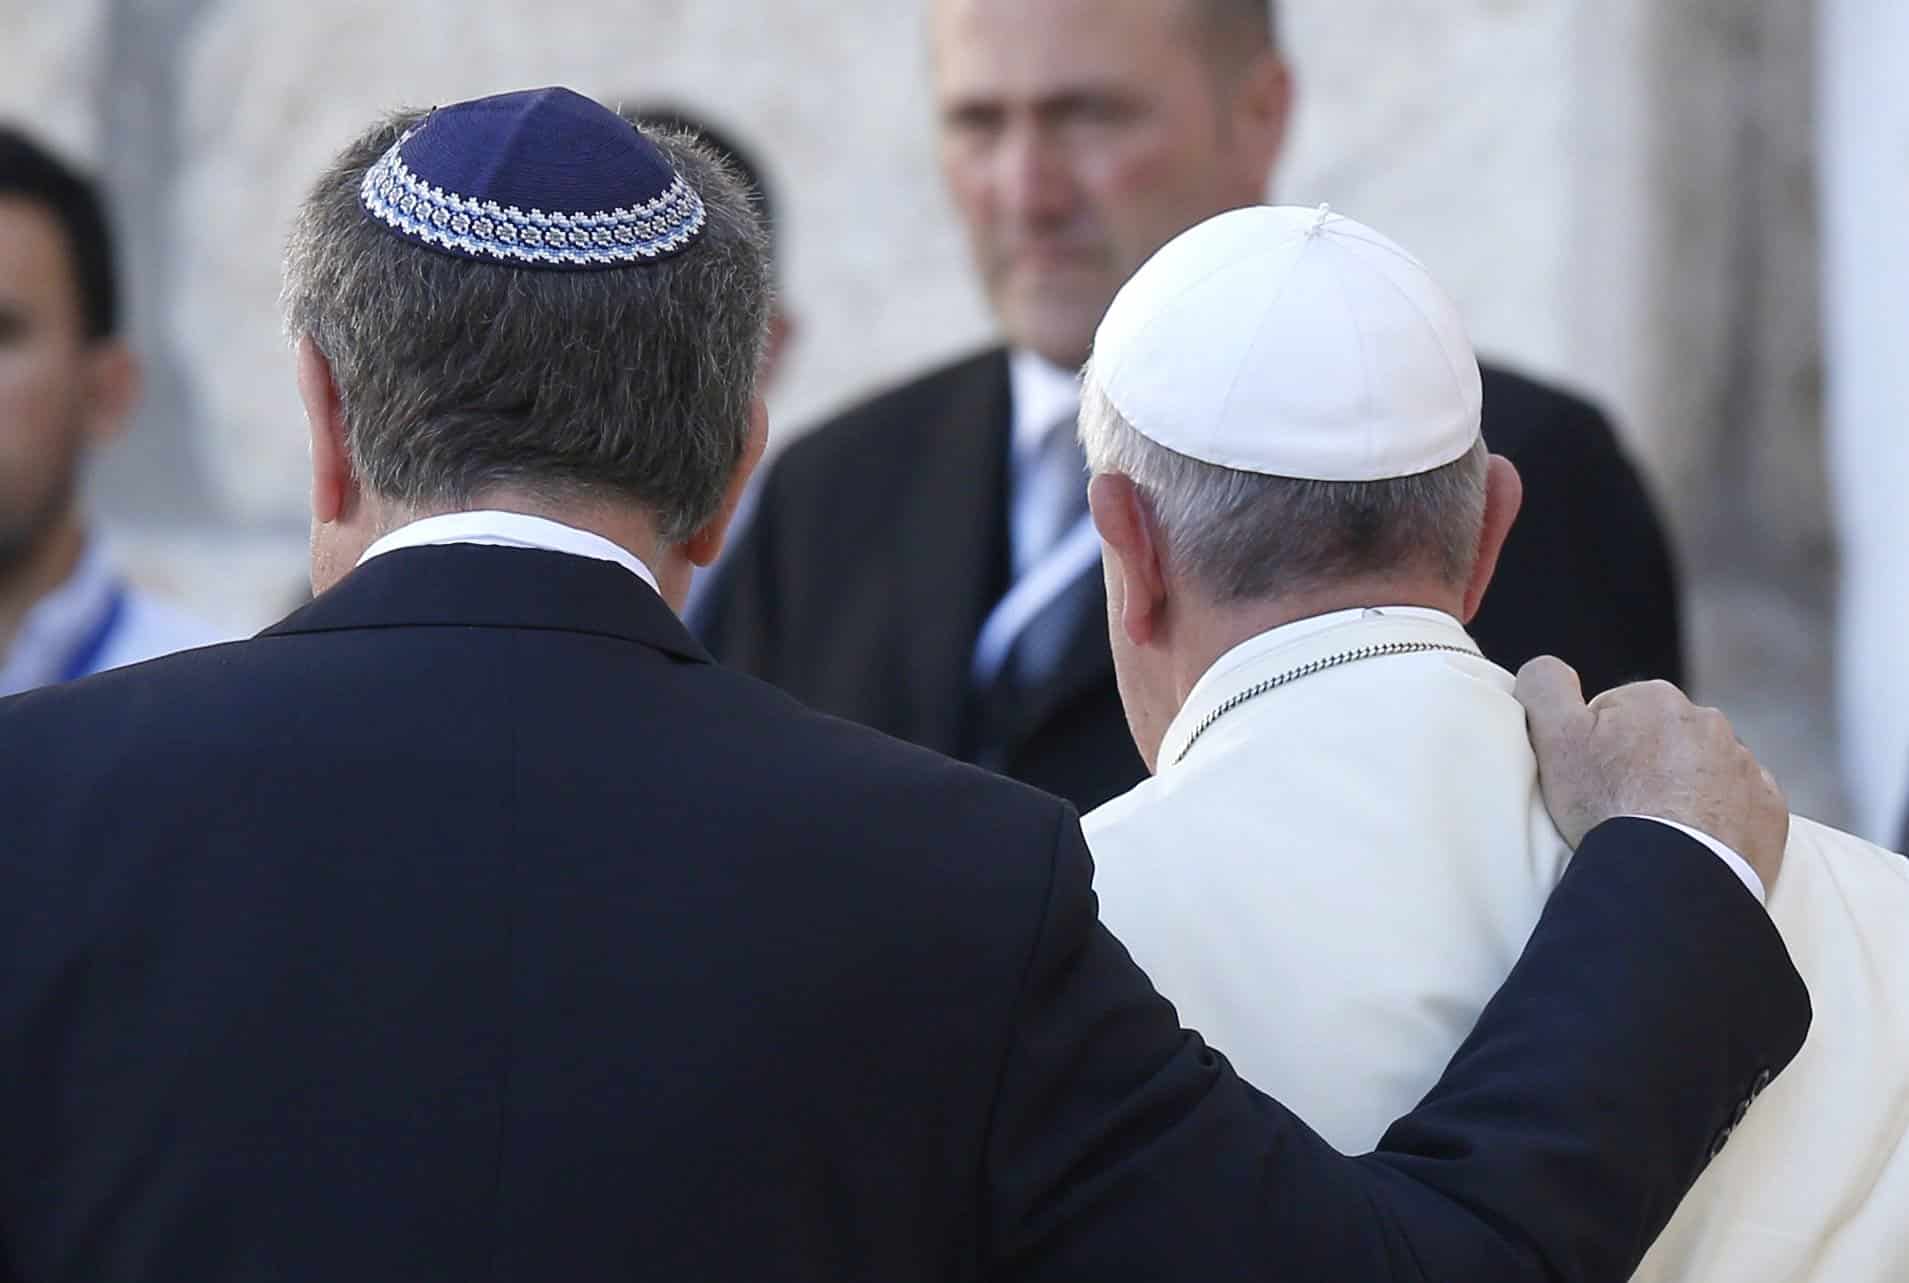 Rabbi Abraham Skorka of Buenos Aires, Argentina, and Pope Francis embrace after visiting the Western Wall in Jerusalem May 26, 2014. Rabbi Skorka, now a senior research fellow for Jewish studies and Jewish-Catholic relations at Georgetown University, and Washington Cardinal Wilton D. Gregory, sent a joint message to the Jewish community at Passover, which began on the evening of April 5, 2023, and will conclude on the evening of April 13 for Jews outside of Israel. (CNS photo/Paul Haring)